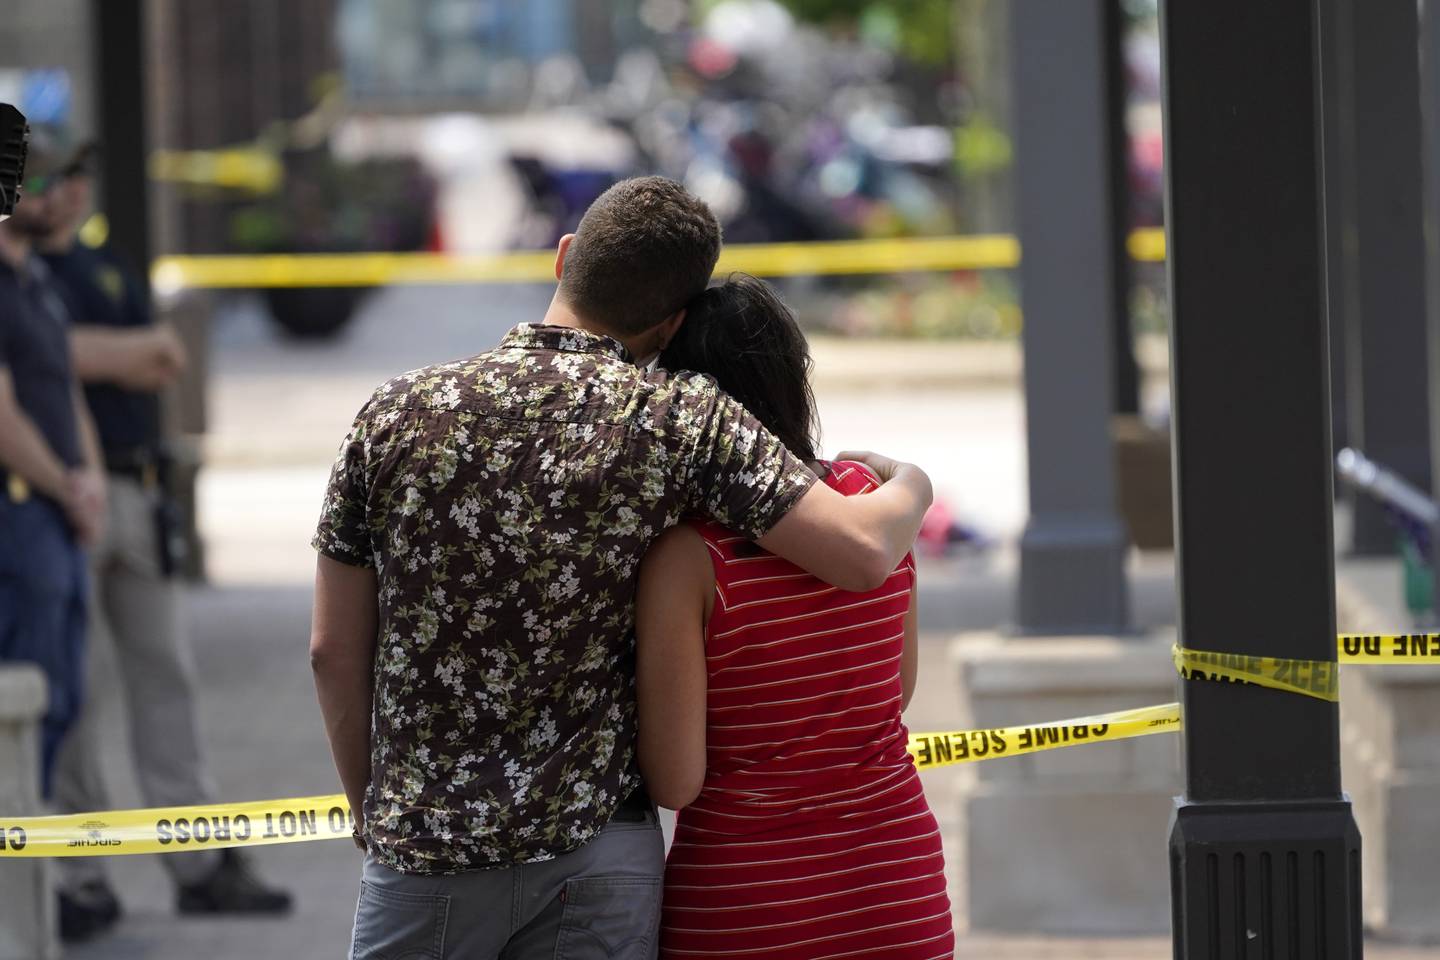 Brooke and Matt Strauss, who were married Sunday, look toward the scene of the mass shooting in downtown Highland Park, Ill., a Chicago suburb, after leaving their wedding bouquets near the scene of Monday's mass shooting, Tuesday, July 5, 2022. (AP Photo/Charles Rex Arbogast)